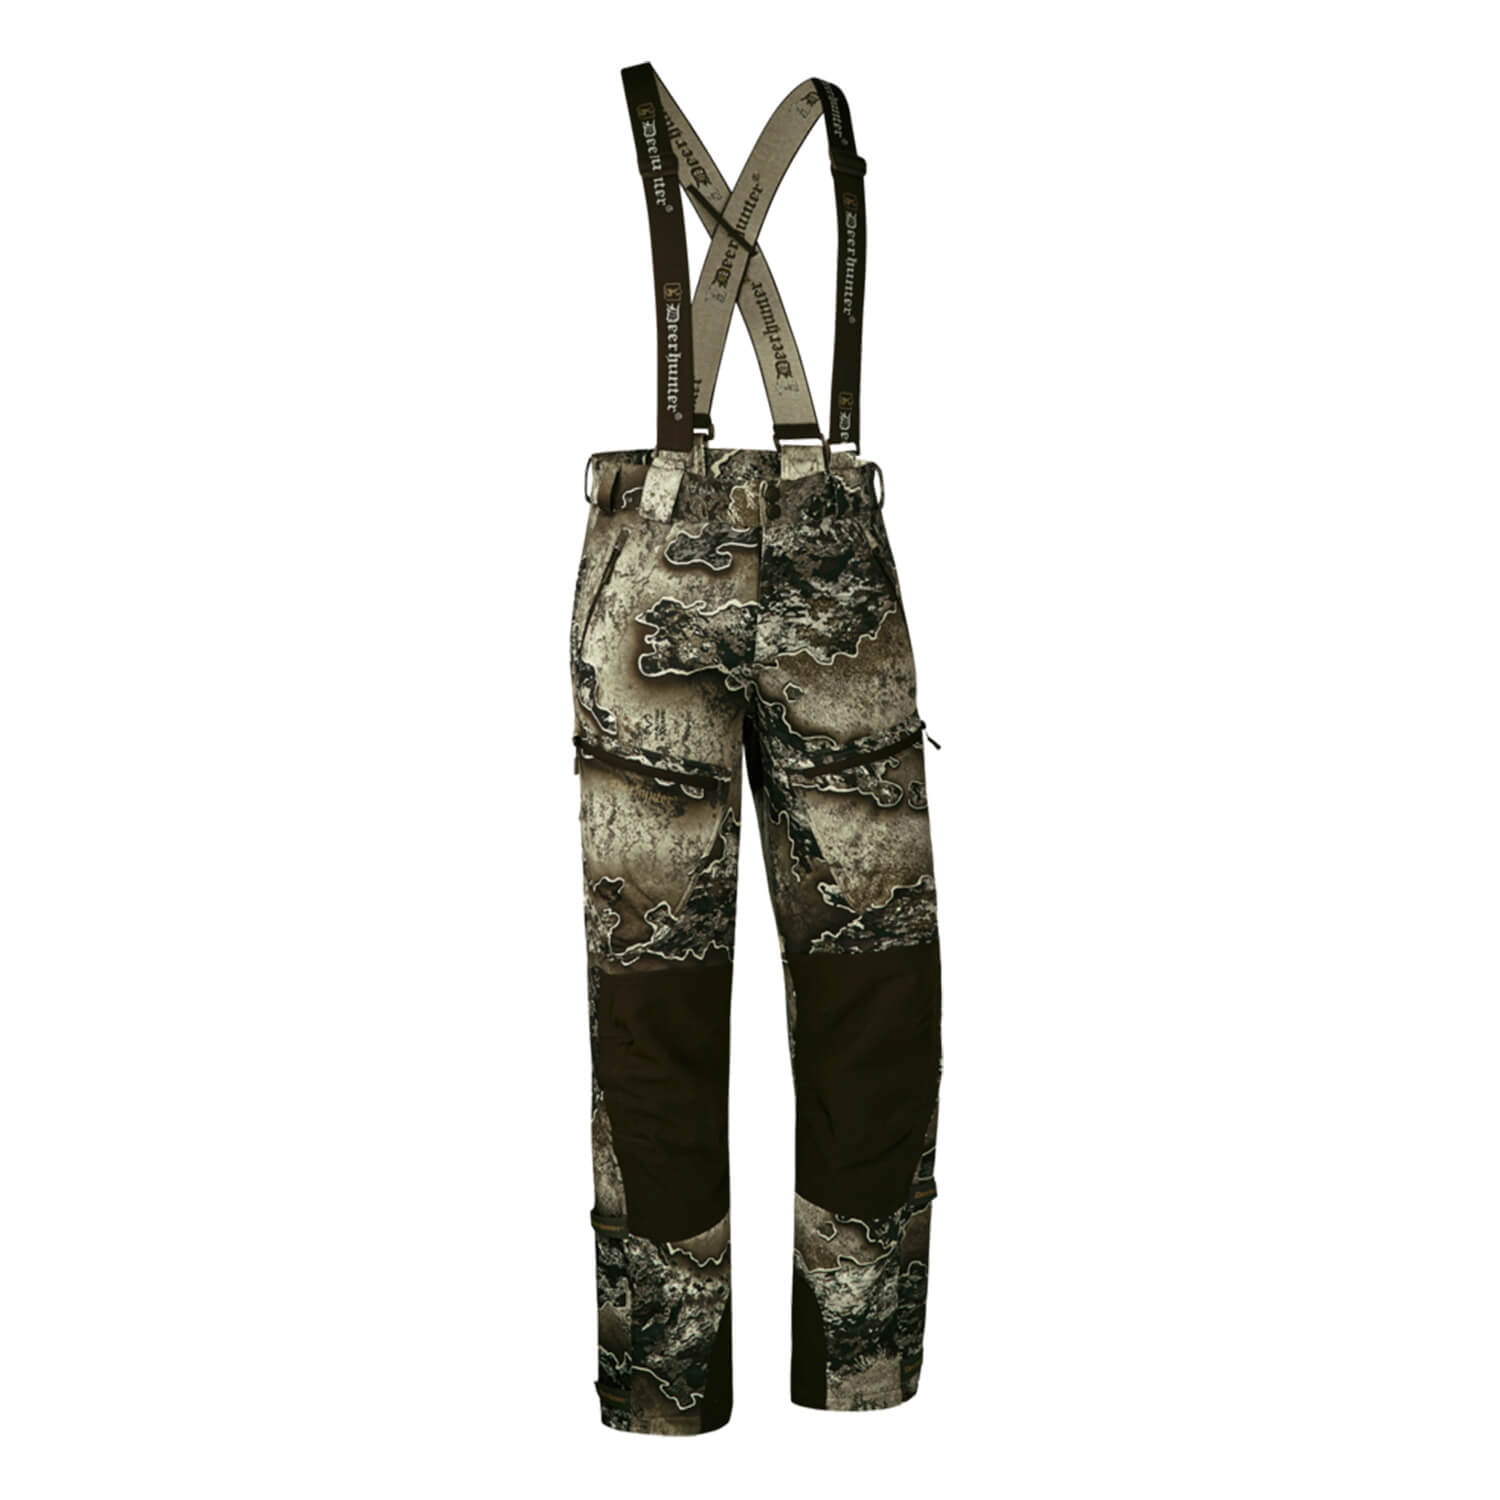 Deerhunter Softshellhose Excape Light (Realtree Excape) - Outlet